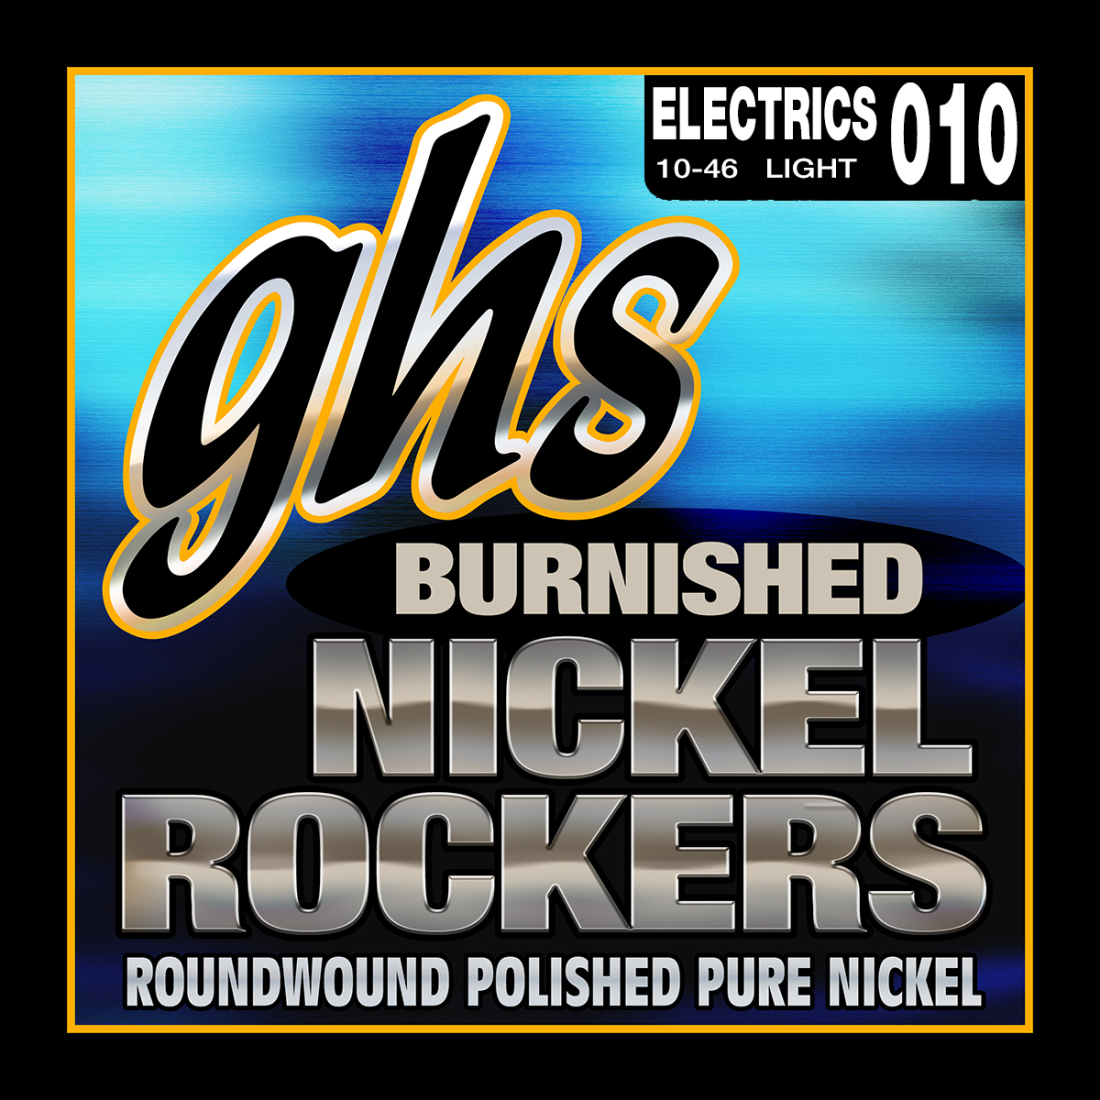 Burnished Pure Nickel Roundwound Electric Guitar Strings - Light